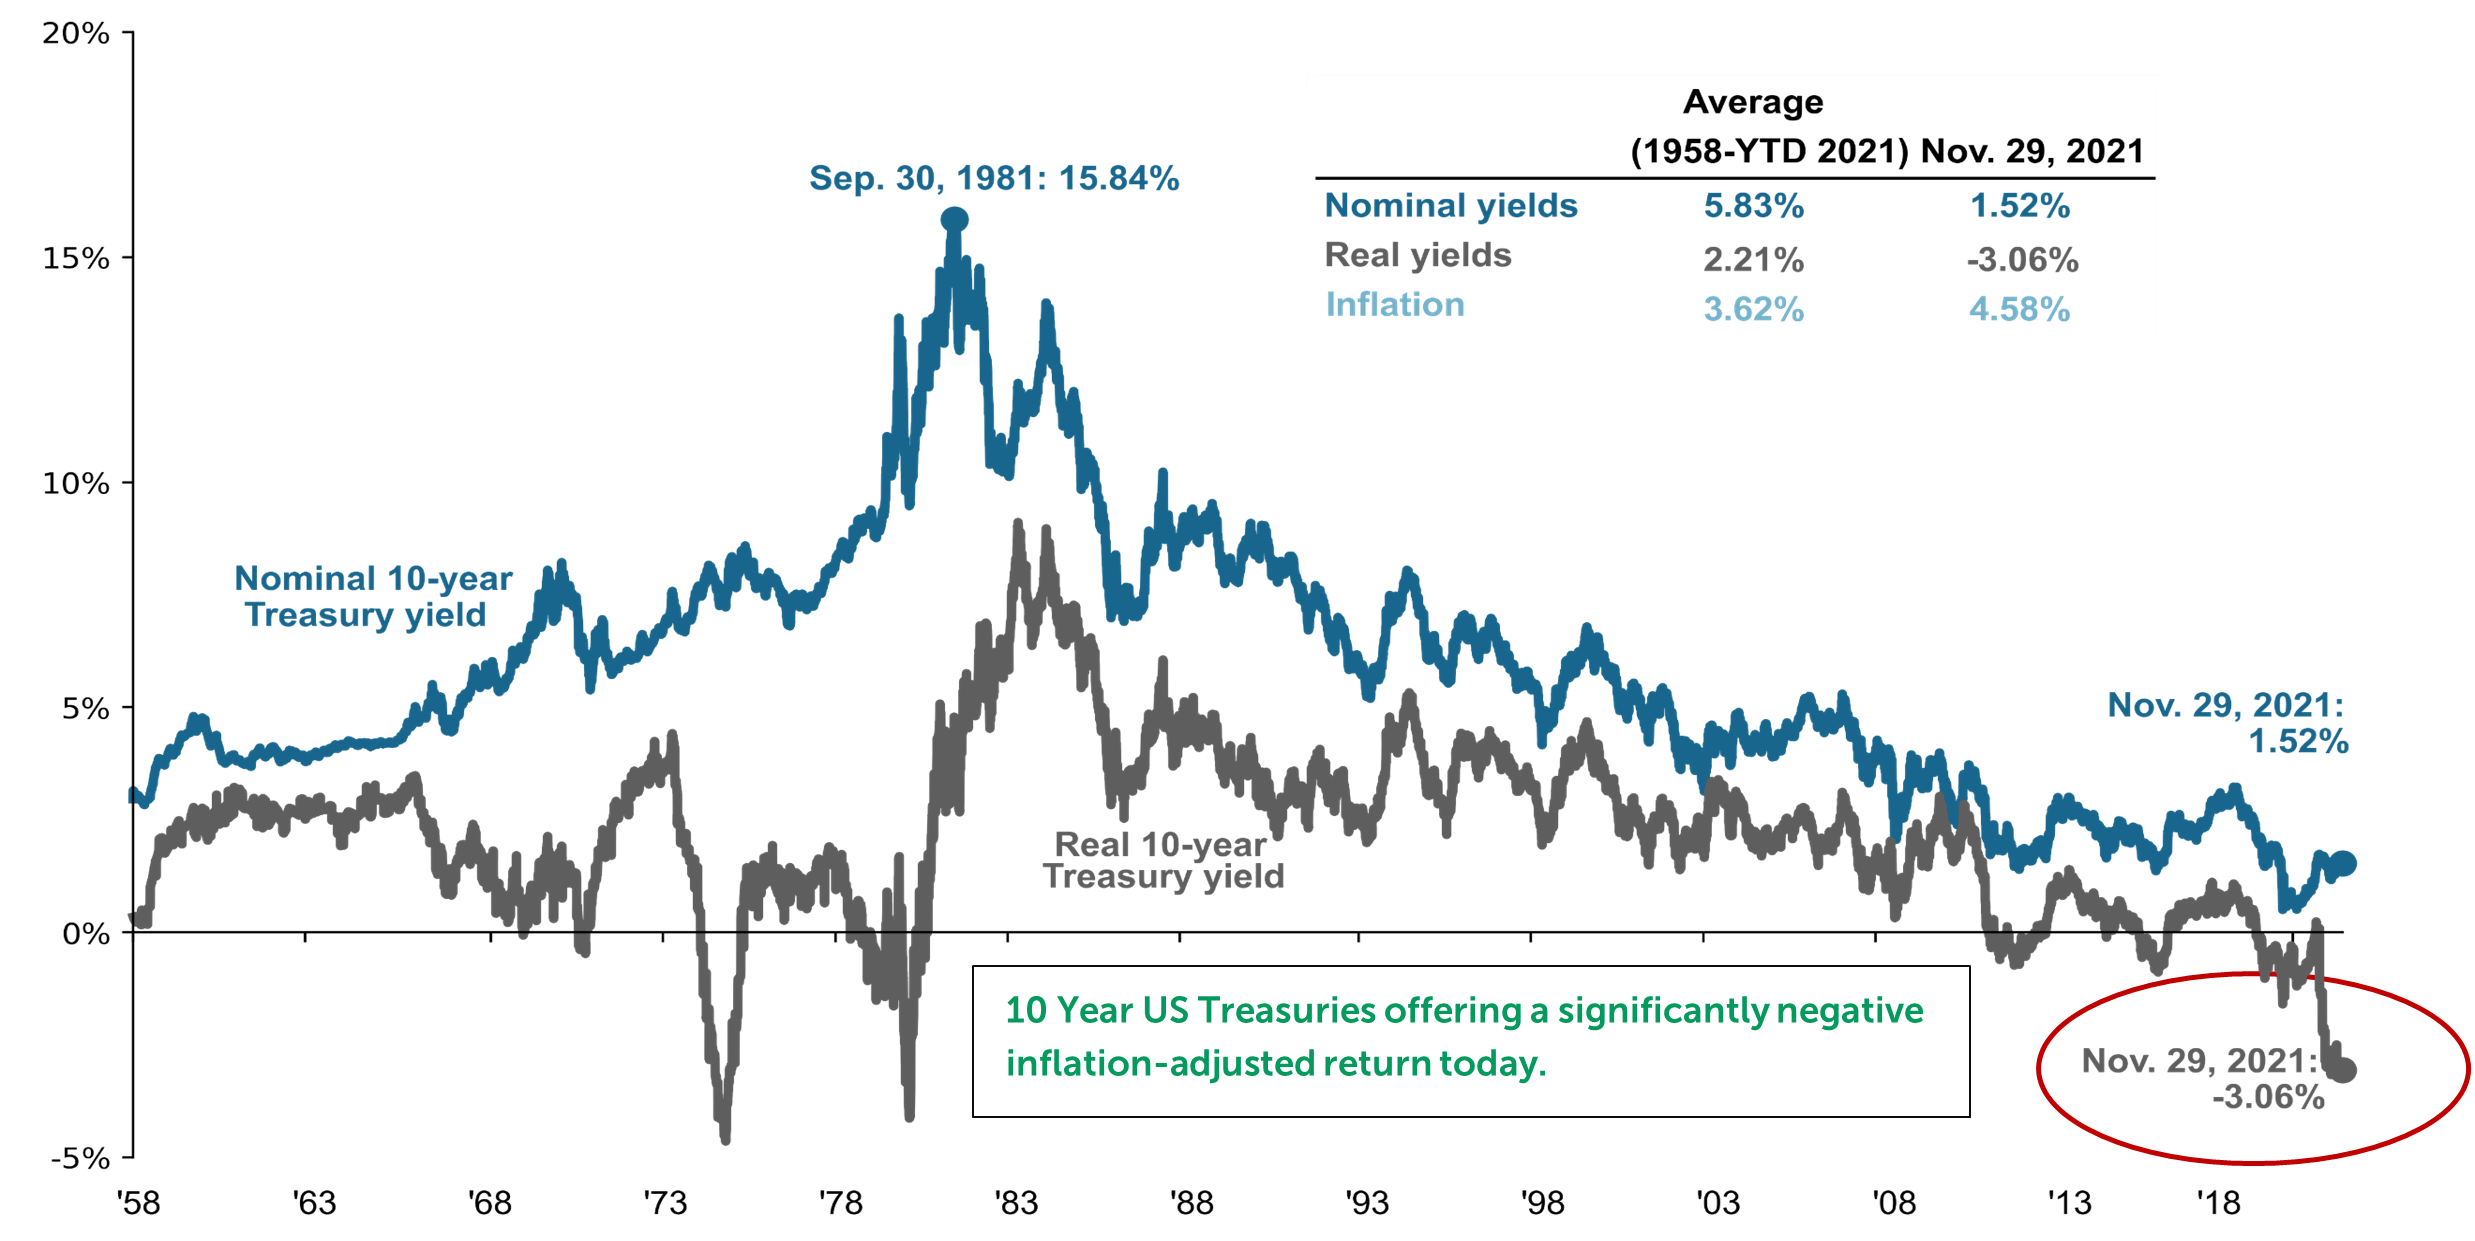 Line graph depicting Nominal 10-year Treasury yield in blue and Real 10-year Treasury yield in grey from 1958 to November 29, 2021, with text that reads: 10 Year US Treasuries offering a significantly negative inflation-adjusted return today.